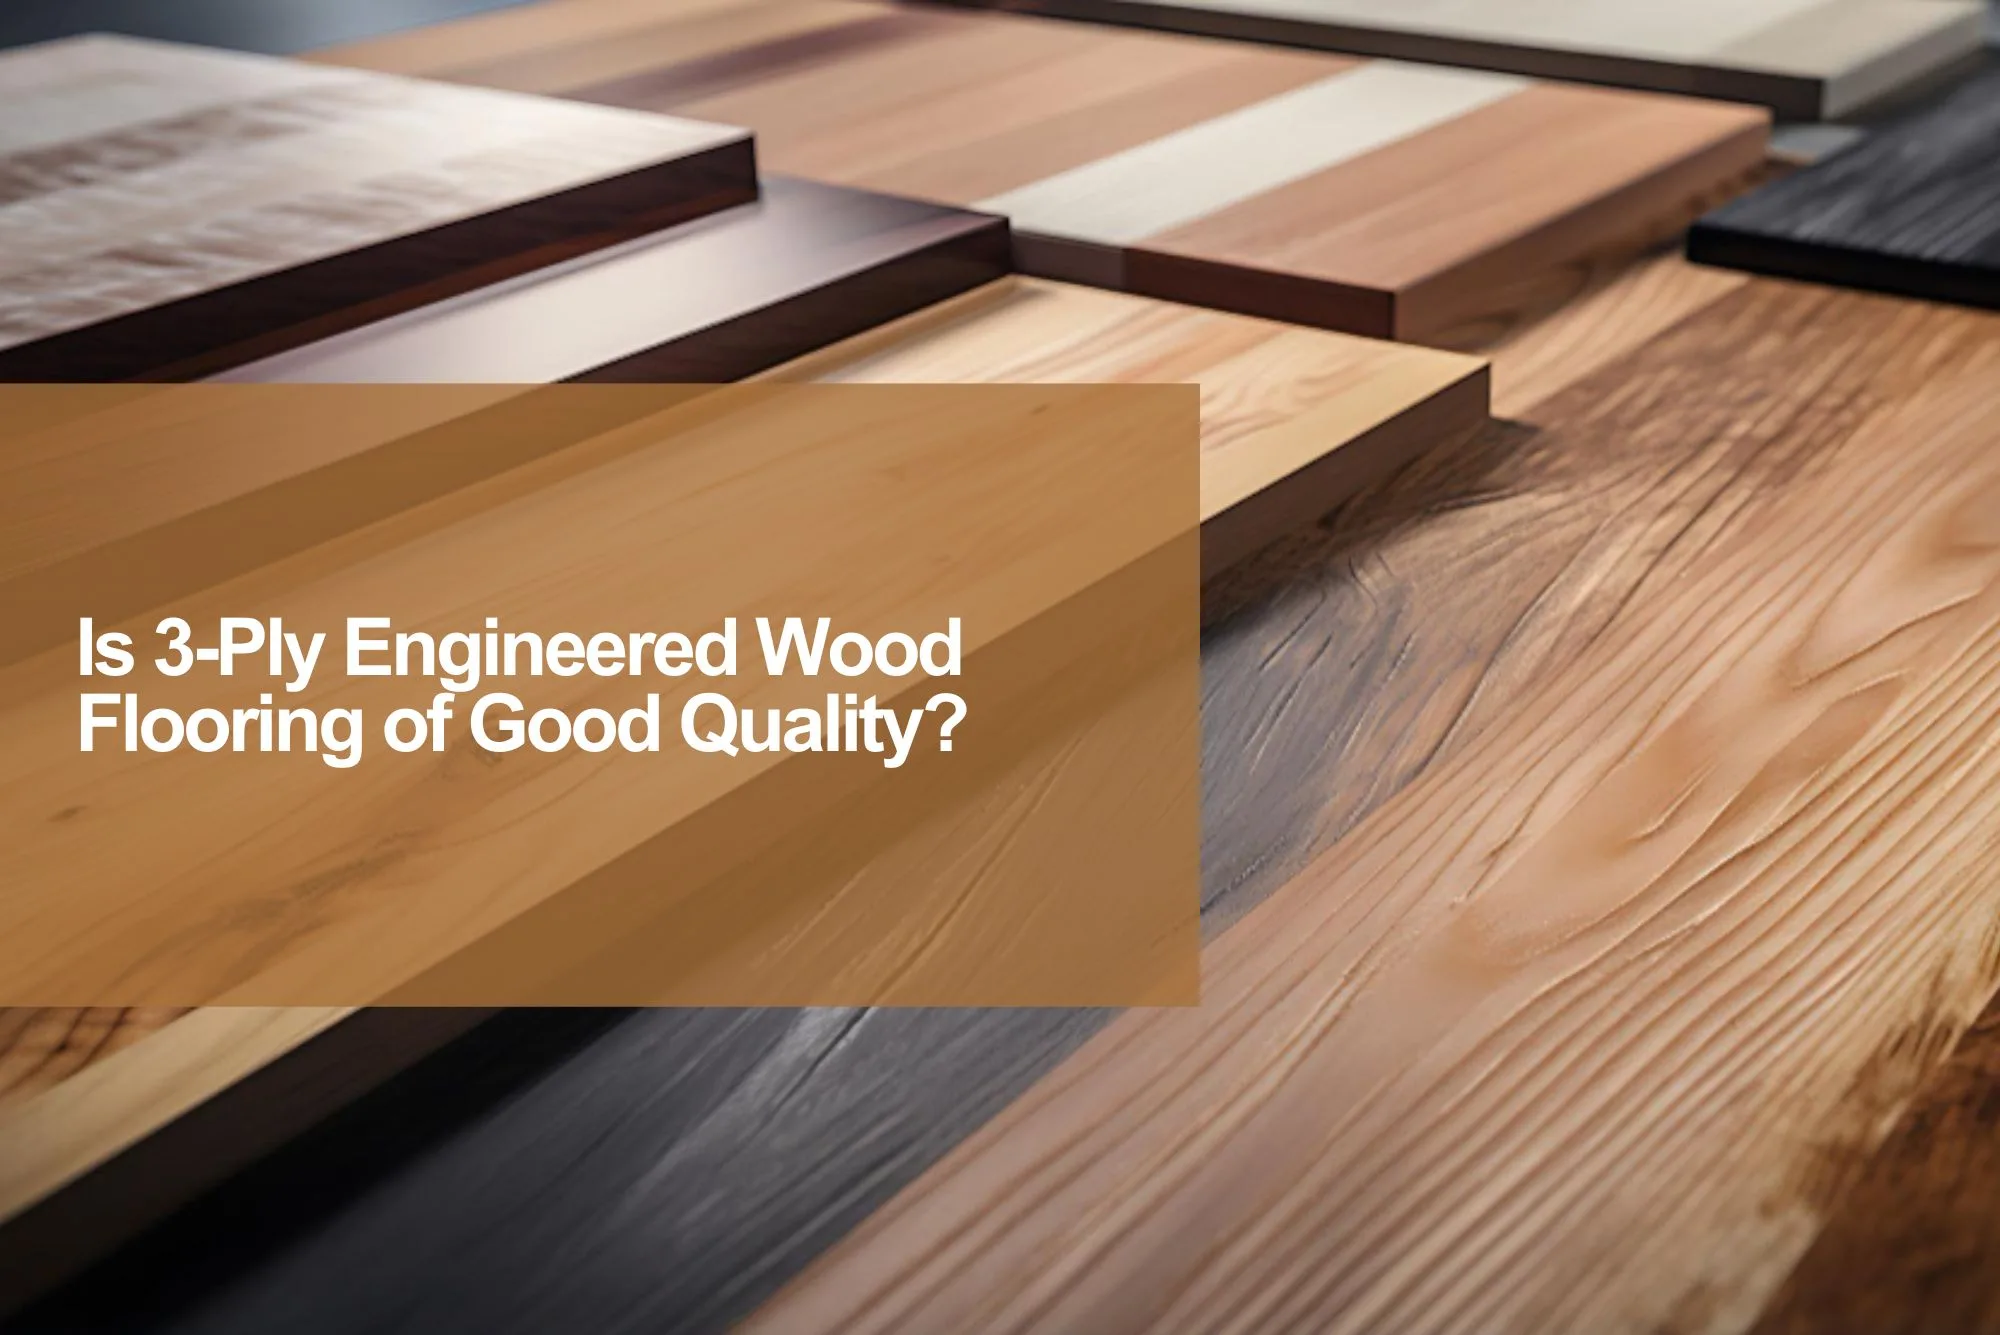 Is 3-Ply Engineered Wood Flooring of Good Quality?